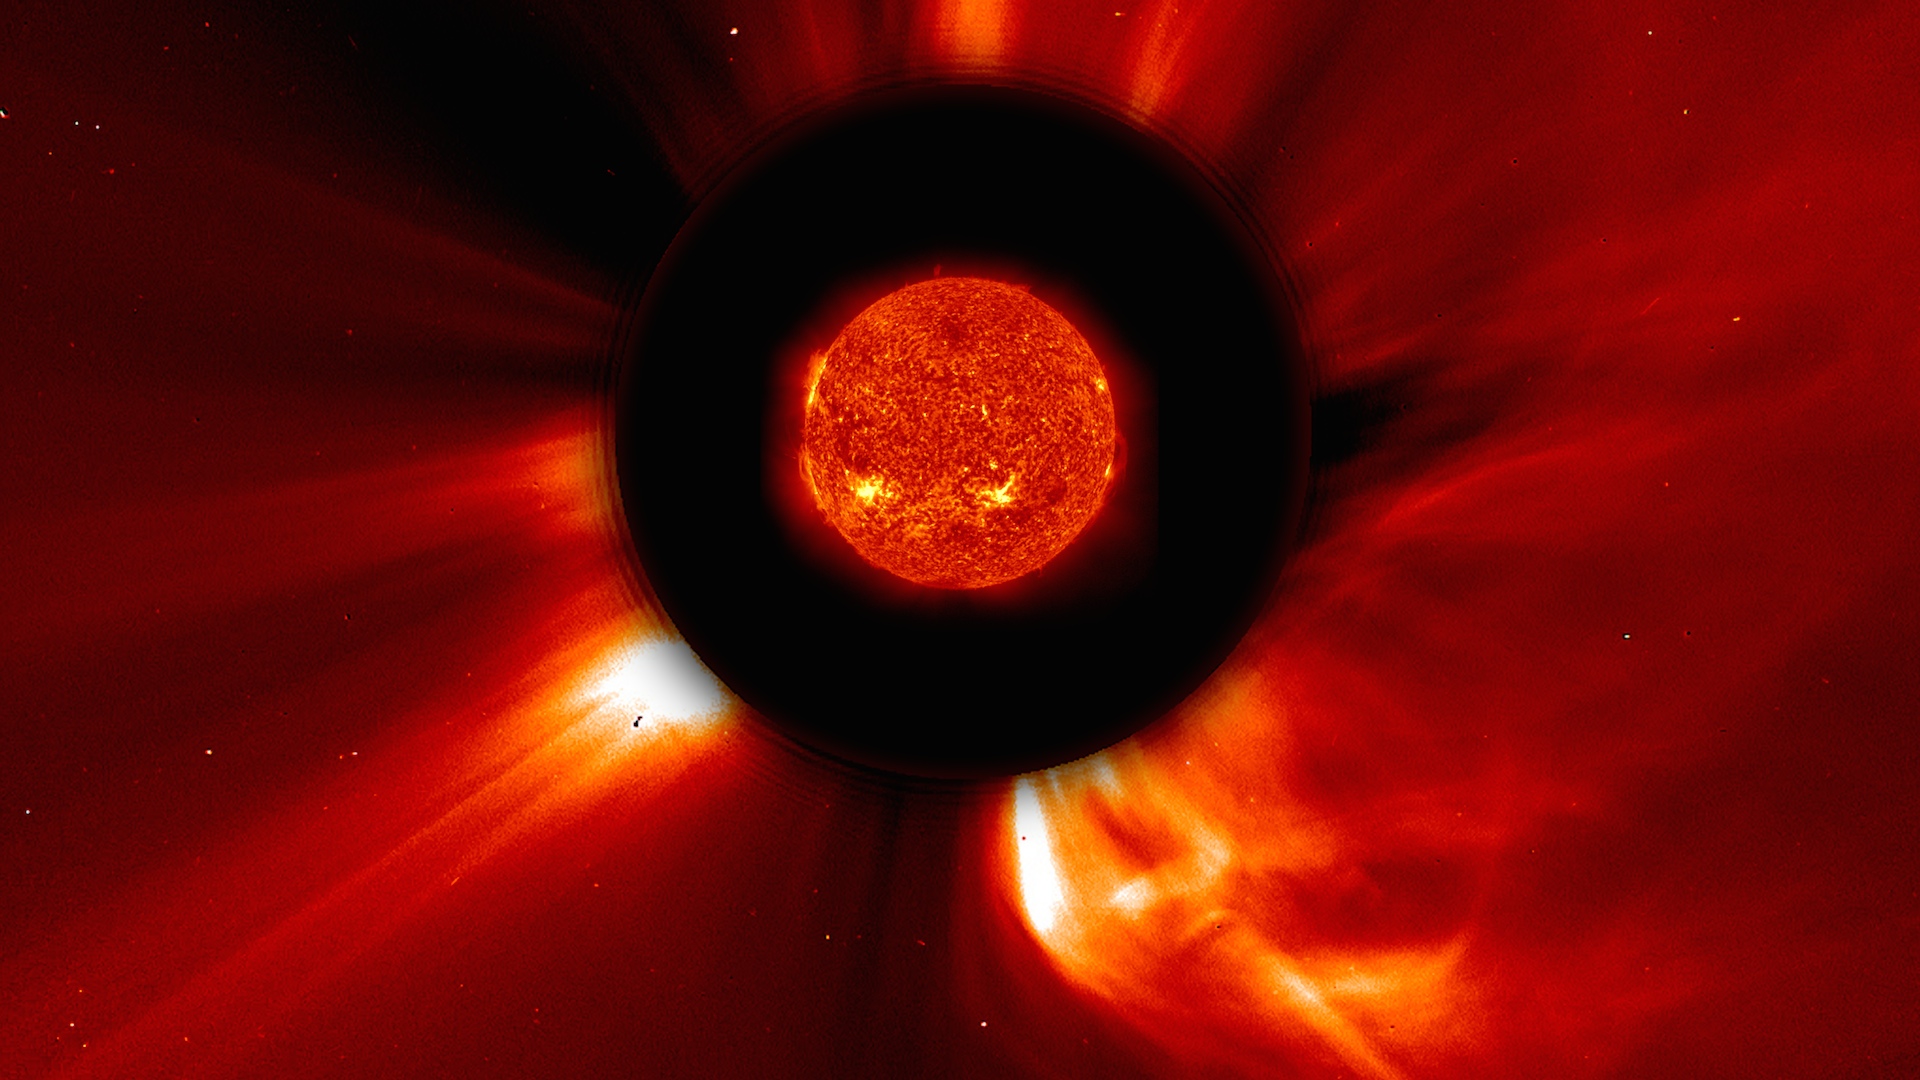 Three NASA observatories work together to help scientists track the journey of a massive coronal mass ejection, or CME, in July 2012.Credit: NASA/SDO/STEREO/ESA/SOHO/WiessingerWatch this video on the NASA Goddard YouTube channel.For complete transcript, click here.